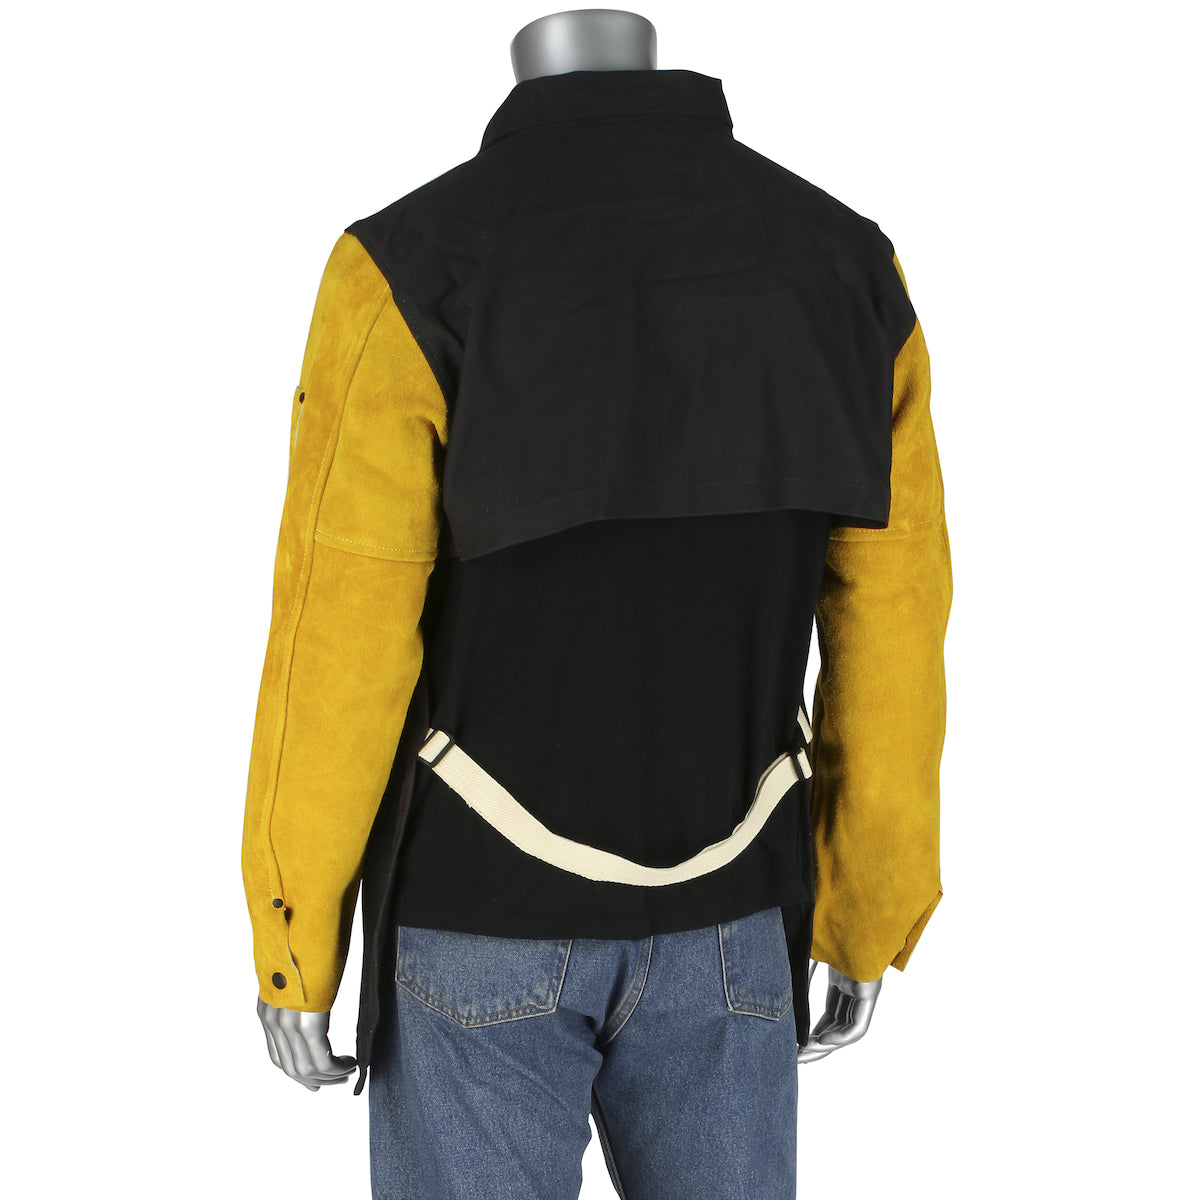 Ironcat 8051/XS Combination FR Cotton / Leather Cape Sleeve with Apron